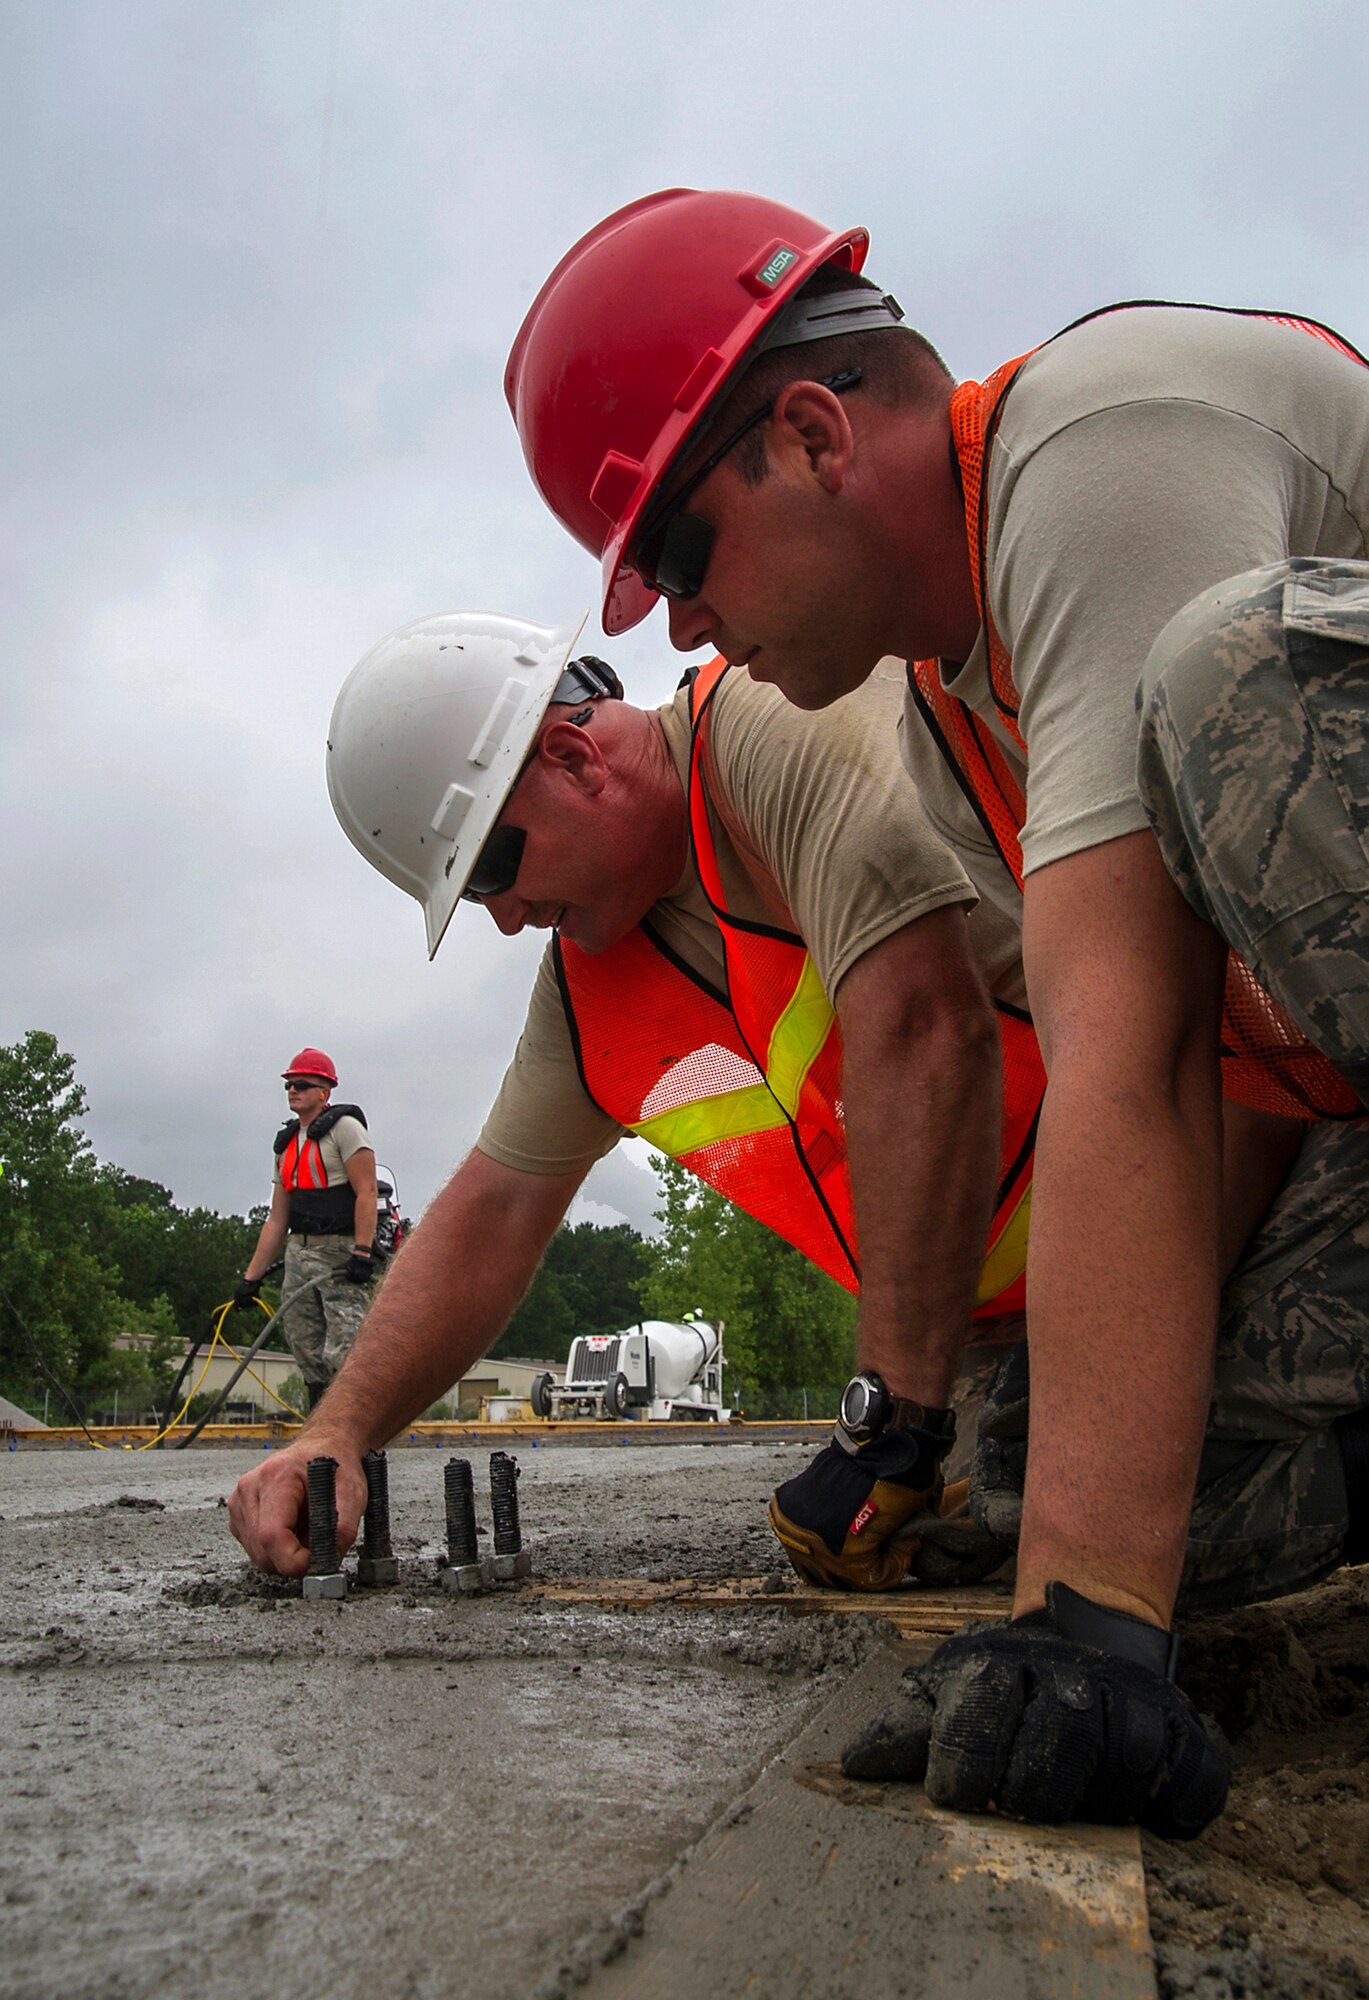 (White hat) Master Sgt. Thomas Martin, 556th RED HORSE Squadron from Hurlbut Field, Florida,  and (Red hat) Brett Bowen, 560th RHS from Joint Base Charleston attach nuts to framing anchor bolts during a construction project at Joint Base Charleston.  Members of the 560th RHS, 628th Civil Engineer Squadron at Joint Base Charleston, 556th RHS, 555th RHS from Nellis Air Force Base, Nevada, and 567th RHS from Seymour Johnson Air Force Base, North Carolina joined forces June, July and August at Joint Base Charleston to build a 4,800 square-foot preengineered  building building to store 560th RHS construction equipment and gear.  Rapid Engineer Deployable, Heavy Operational Repair Squadron, Engineer (RED HORSE) squadrons provide the Air Force with a highly mobile civil engineering capability in support of contingency and special operations worldwide. They are self-sufficient, mobile squadrons that provide heavy construction support such as runway/facility construction, electrical upgrades, and equipment transport when requirements exceed normal base civil engineer capabilities and where Army engineer support is not readily available. (U.S. Air Force Photo by Michael Dukes)